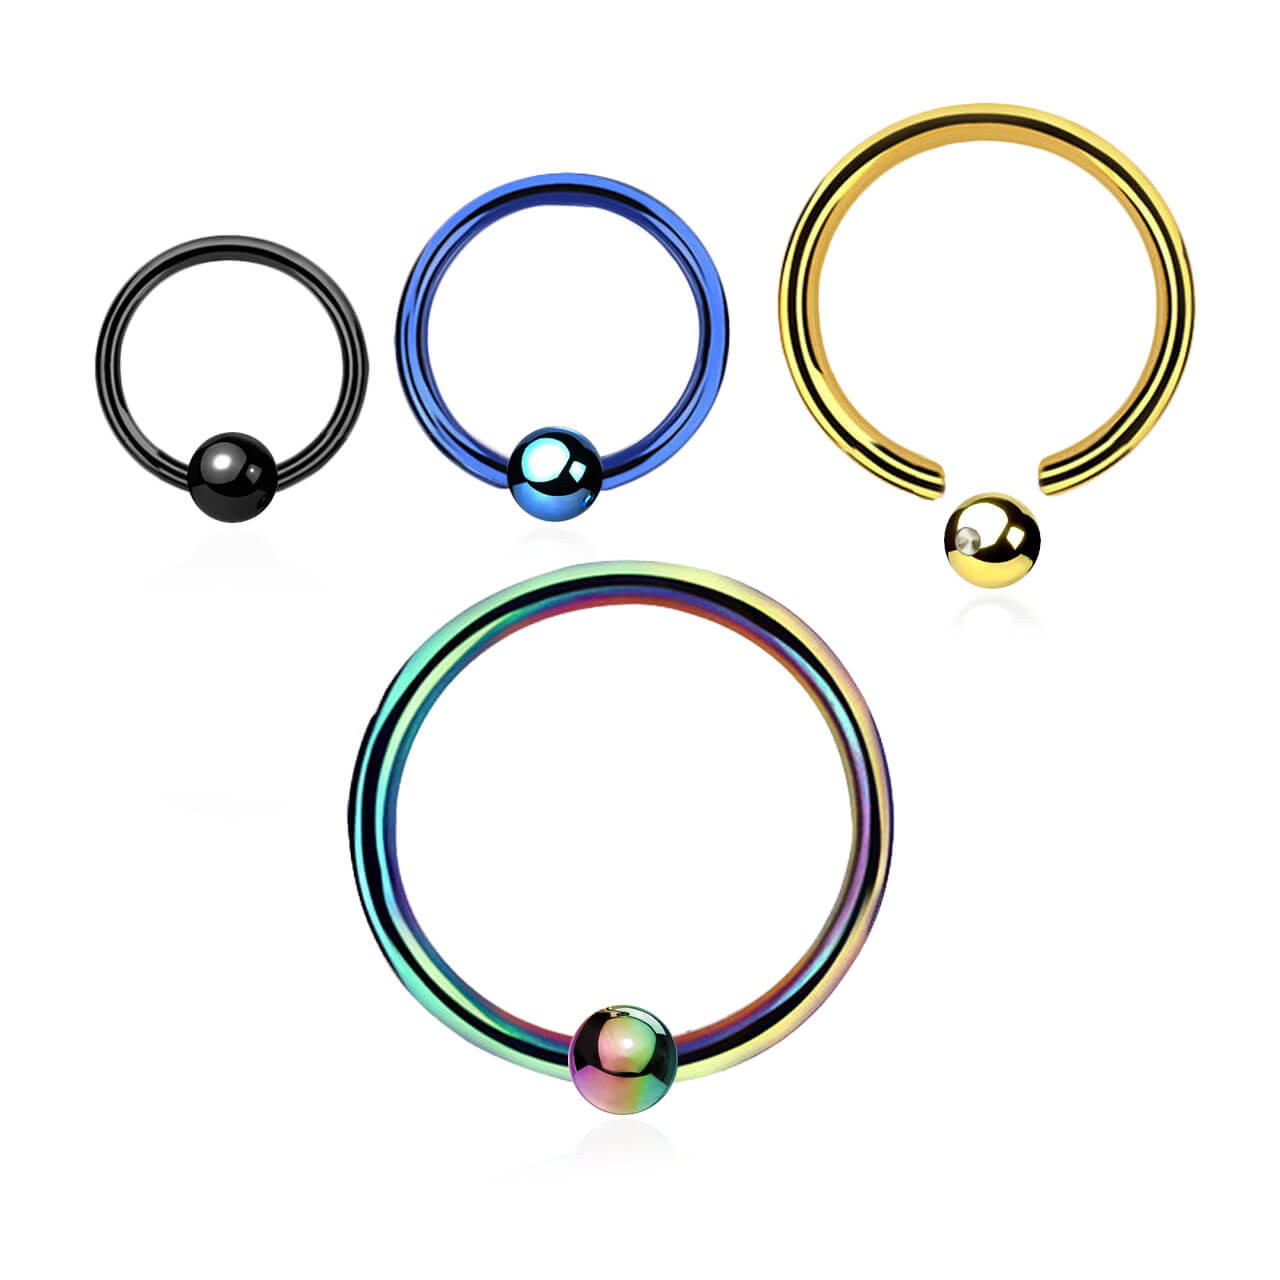 PBC12B3 Wholesale Assortment of 25 black anodized plated 316L steel ball closure rings, Thickness 1.2mm, Ball size 3mm